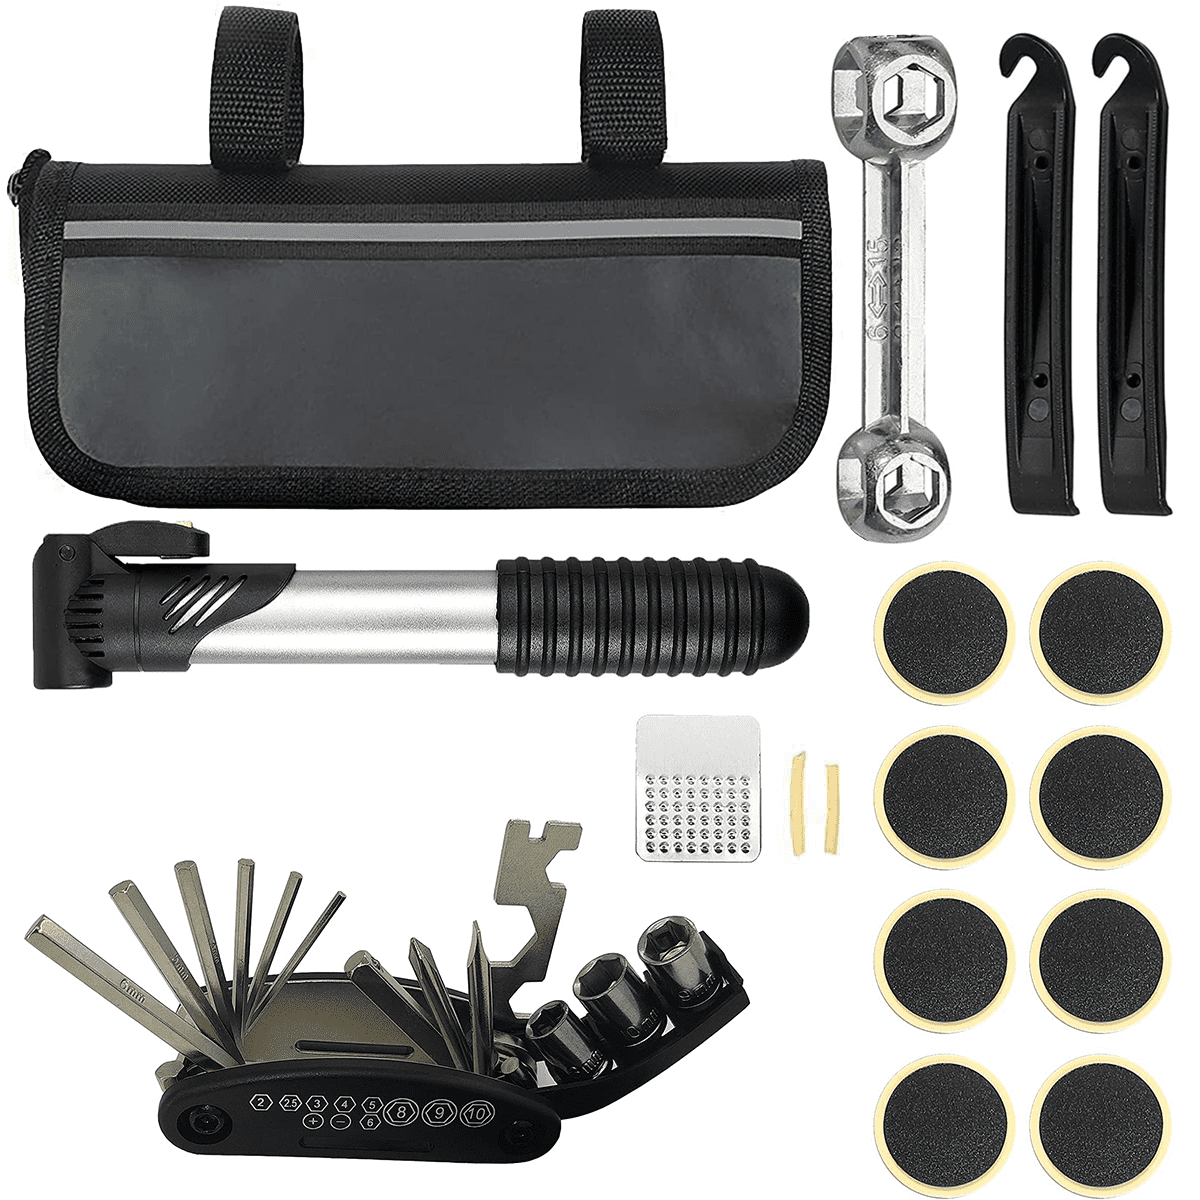 103pc Tire & Rubber Patch Kit for Auto, Car, Bicycle Repairs with